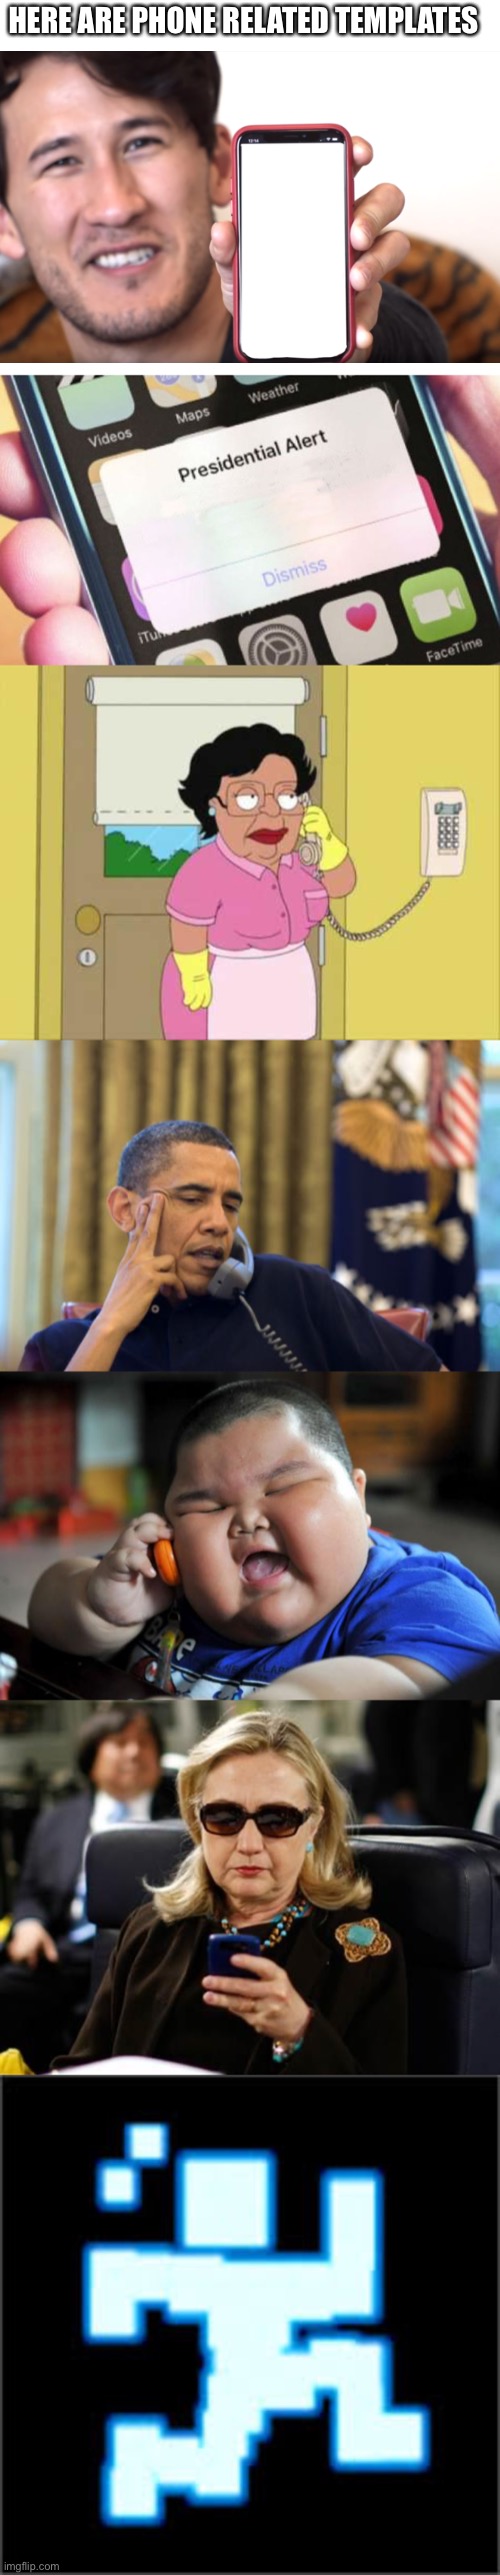 This some phoney stuff | HERE ARE PHONE RELATED TEMPLATES | image tagged in blank white template,memes,presidential alert,consuela,no i can't obama,fat asian kid | made w/ Imgflip meme maker